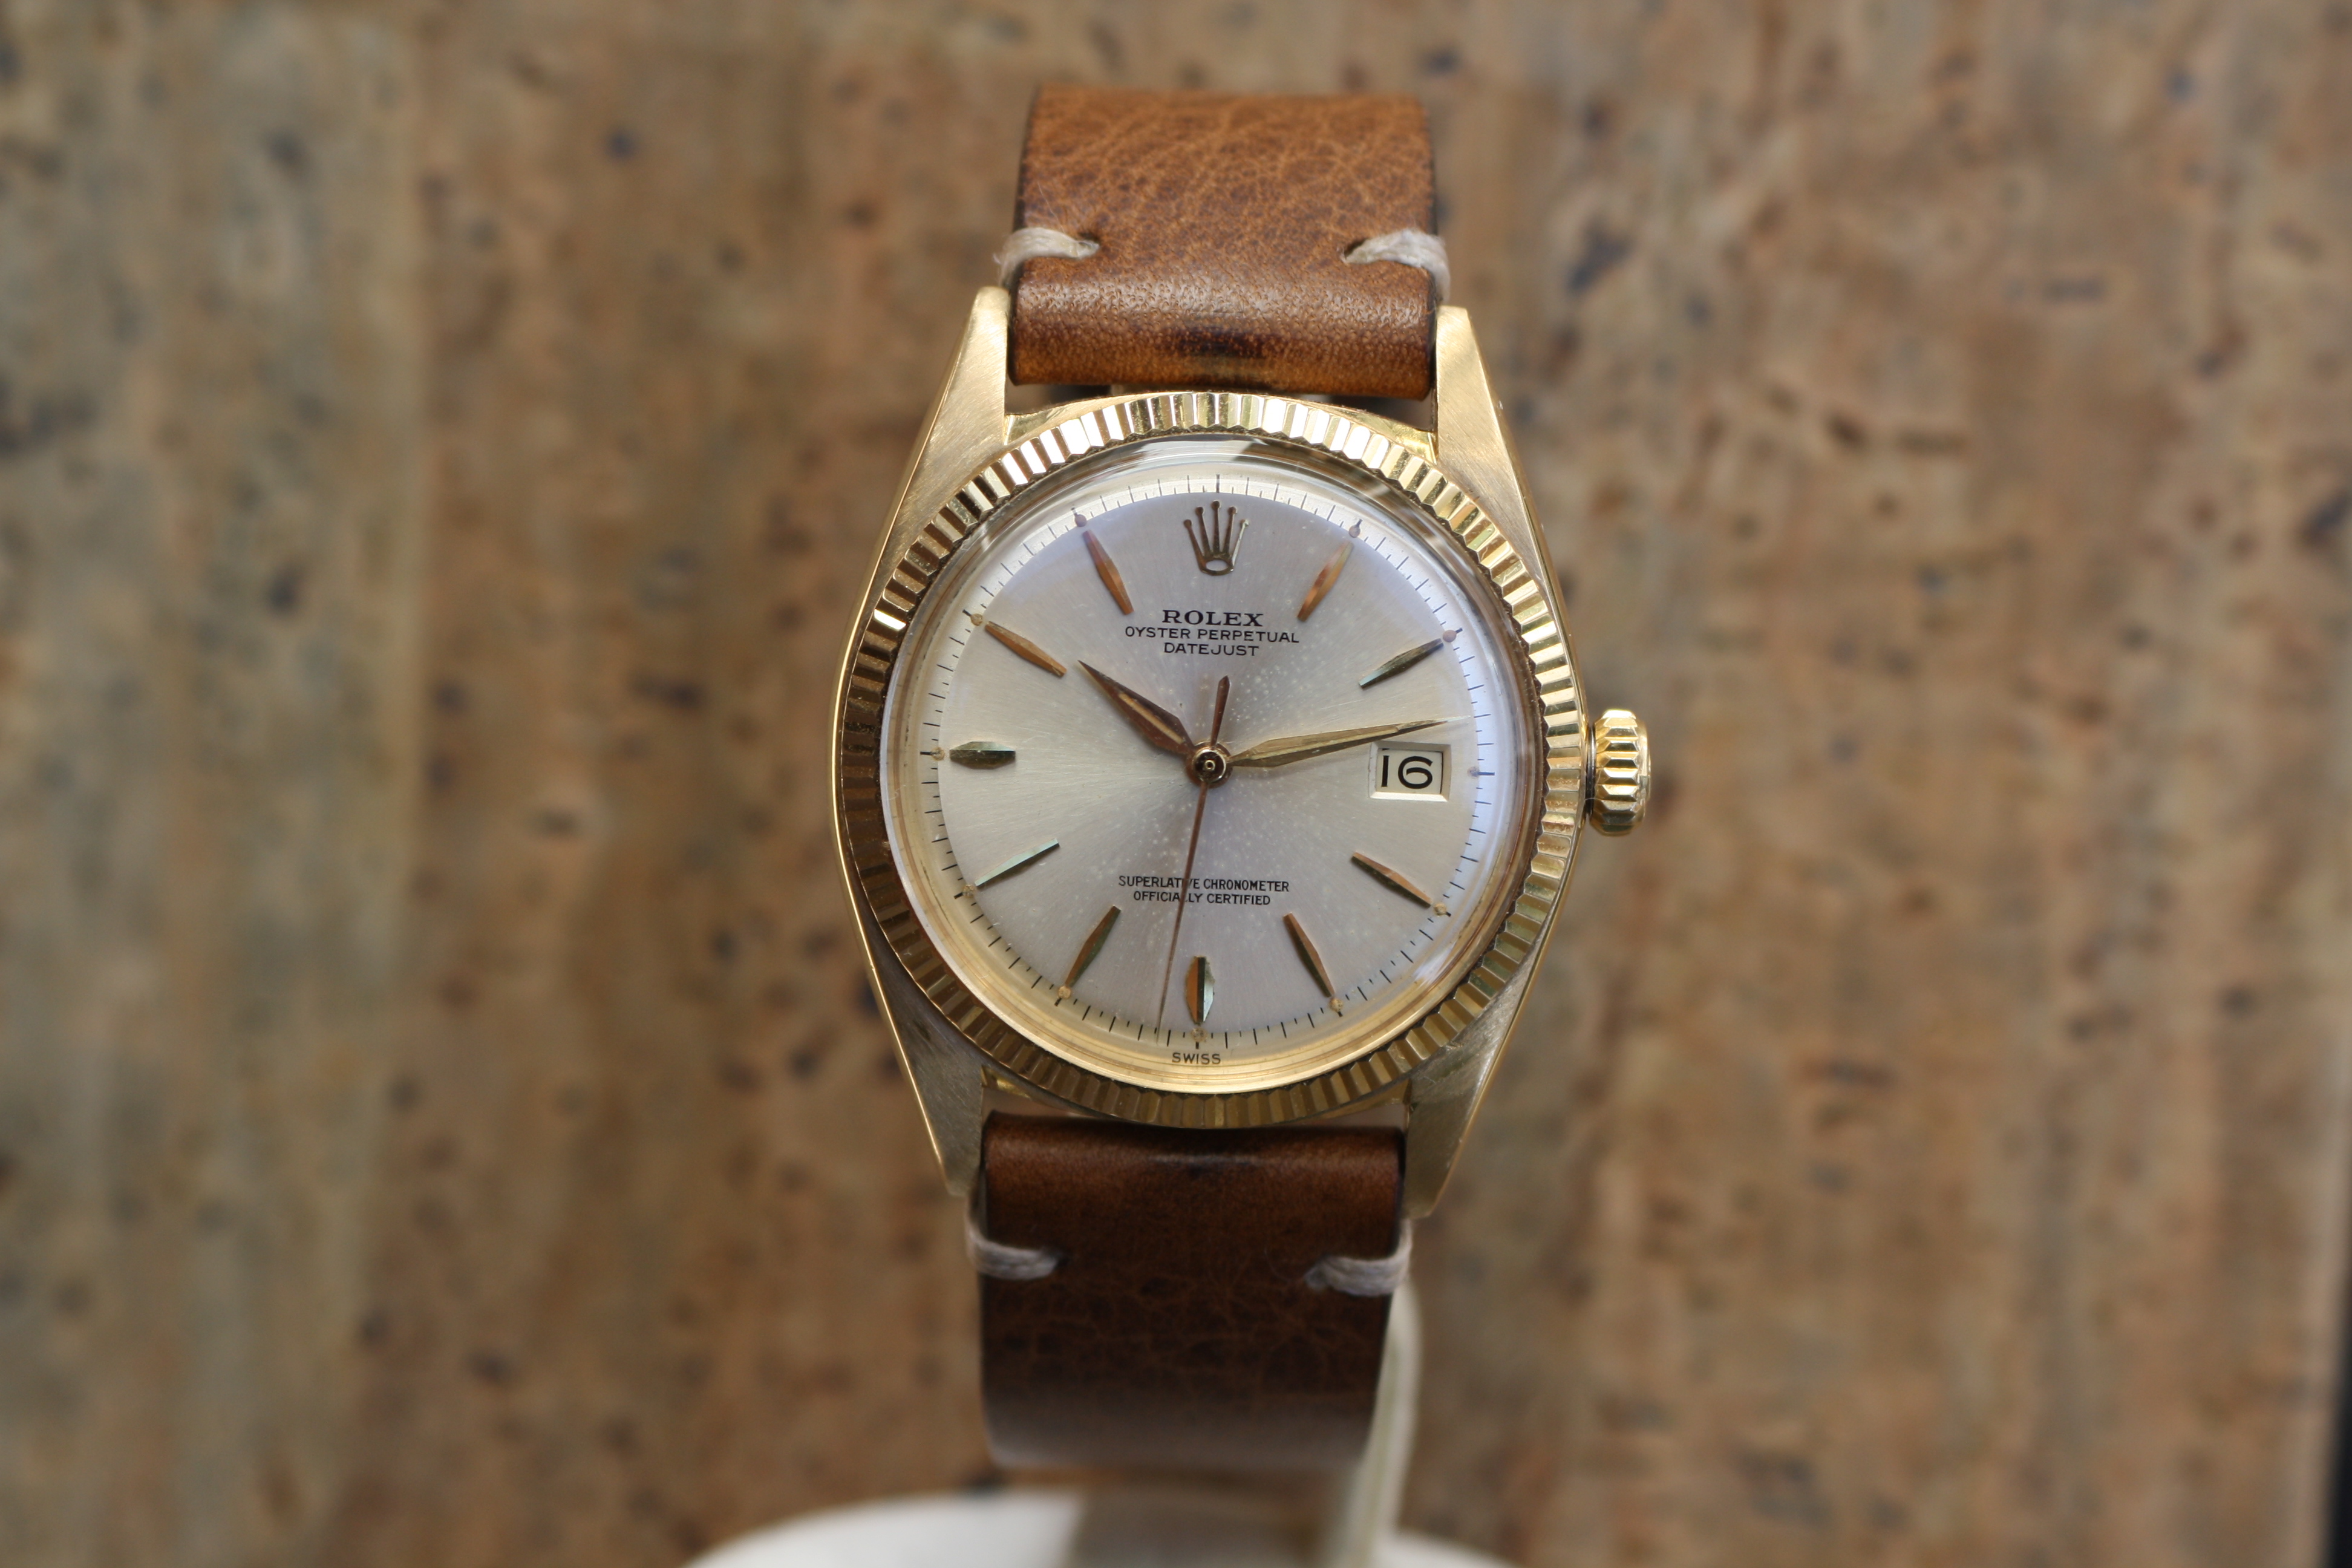 Vintage Rolex Datejust 1601 with very 